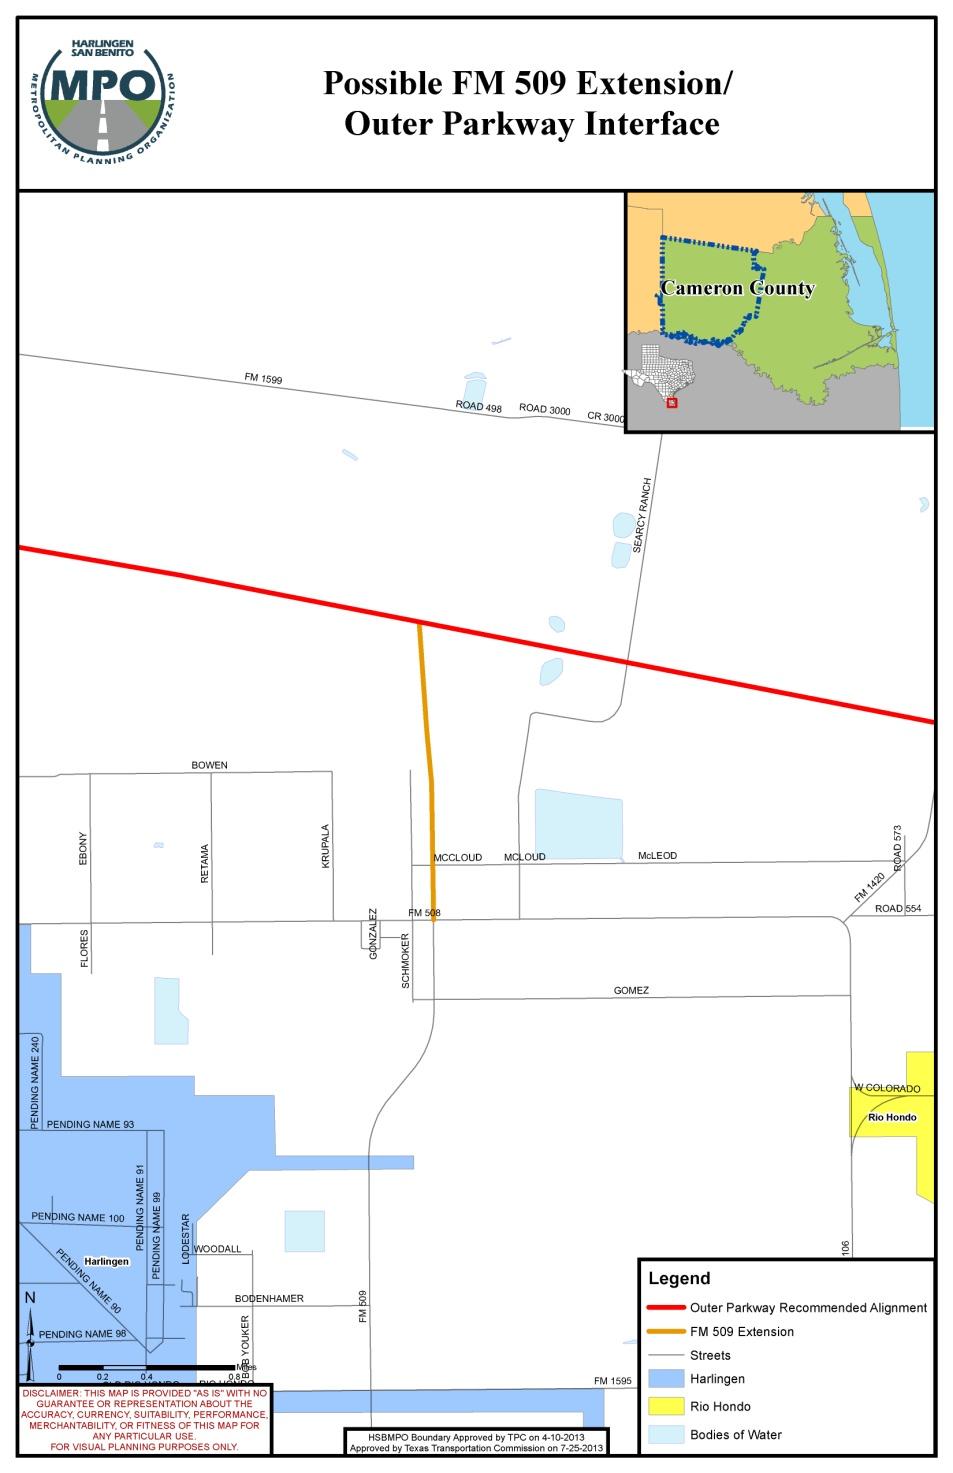 Priority 13 - FM 509 Extension Expand FM 509 north to connect to the proposed Outer Parkway (FM 1925) Project, an